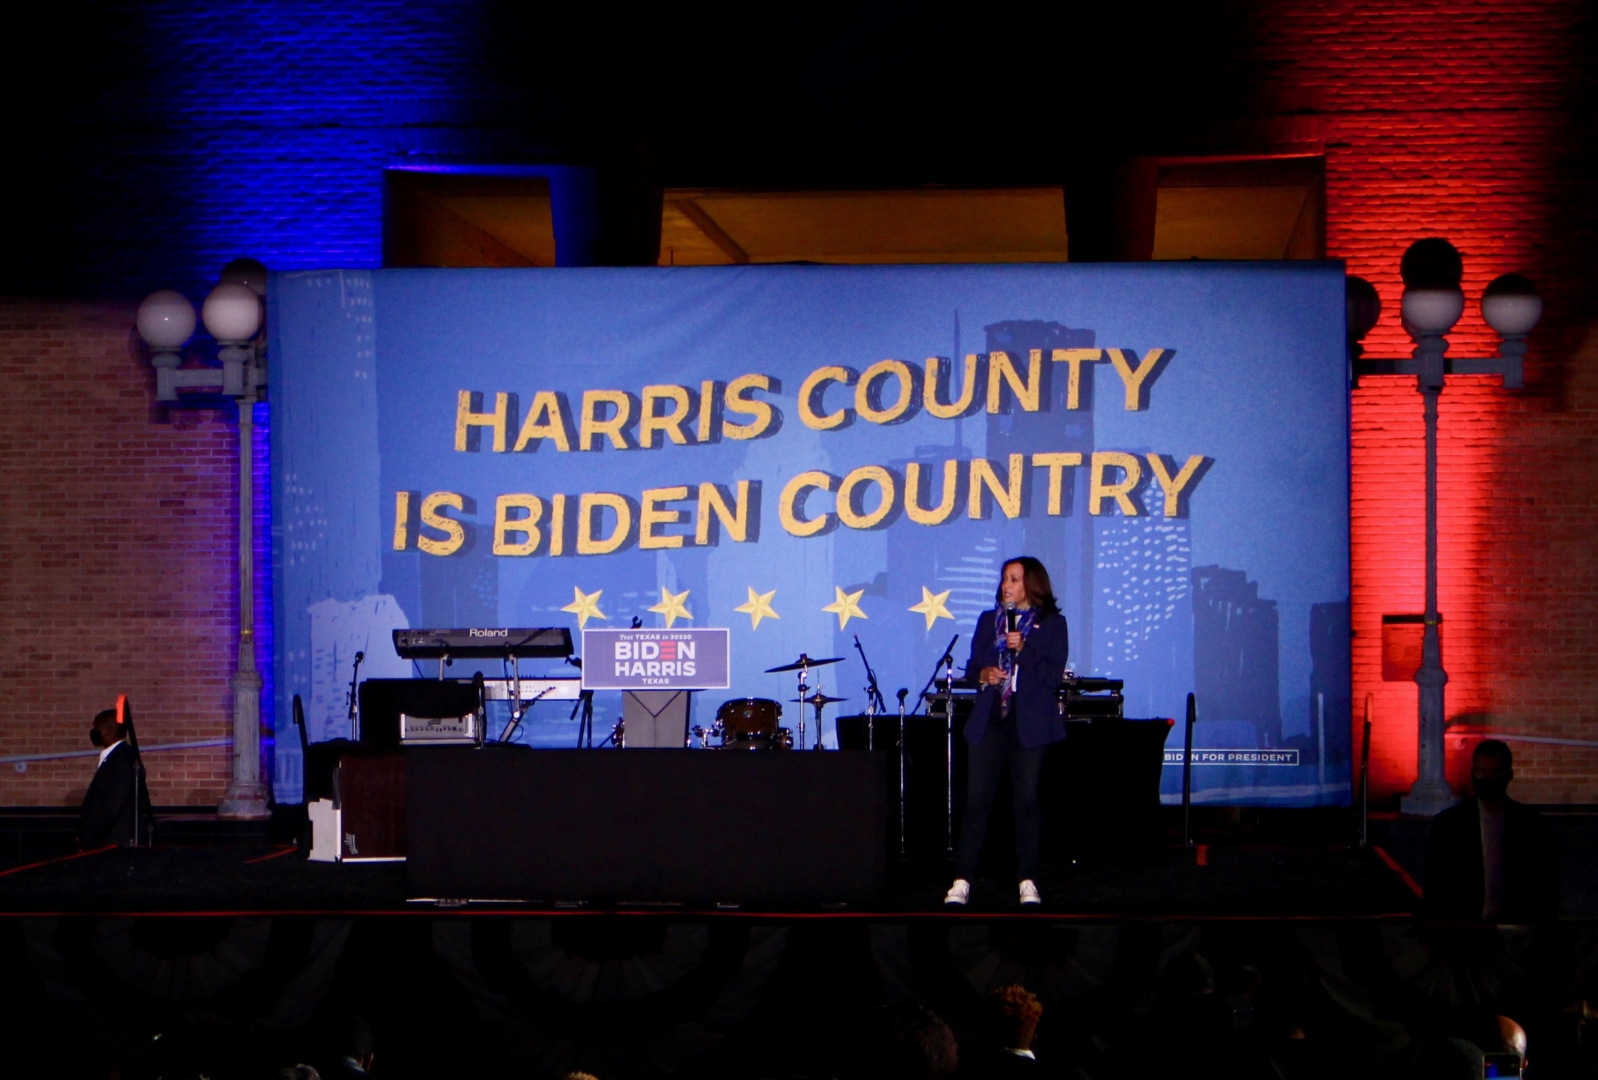 Then-vice presidential candidate Kamala Harris speaks at a campaign event at UH on Oct. 30, 2020. | Donna Keeya/The Cougar